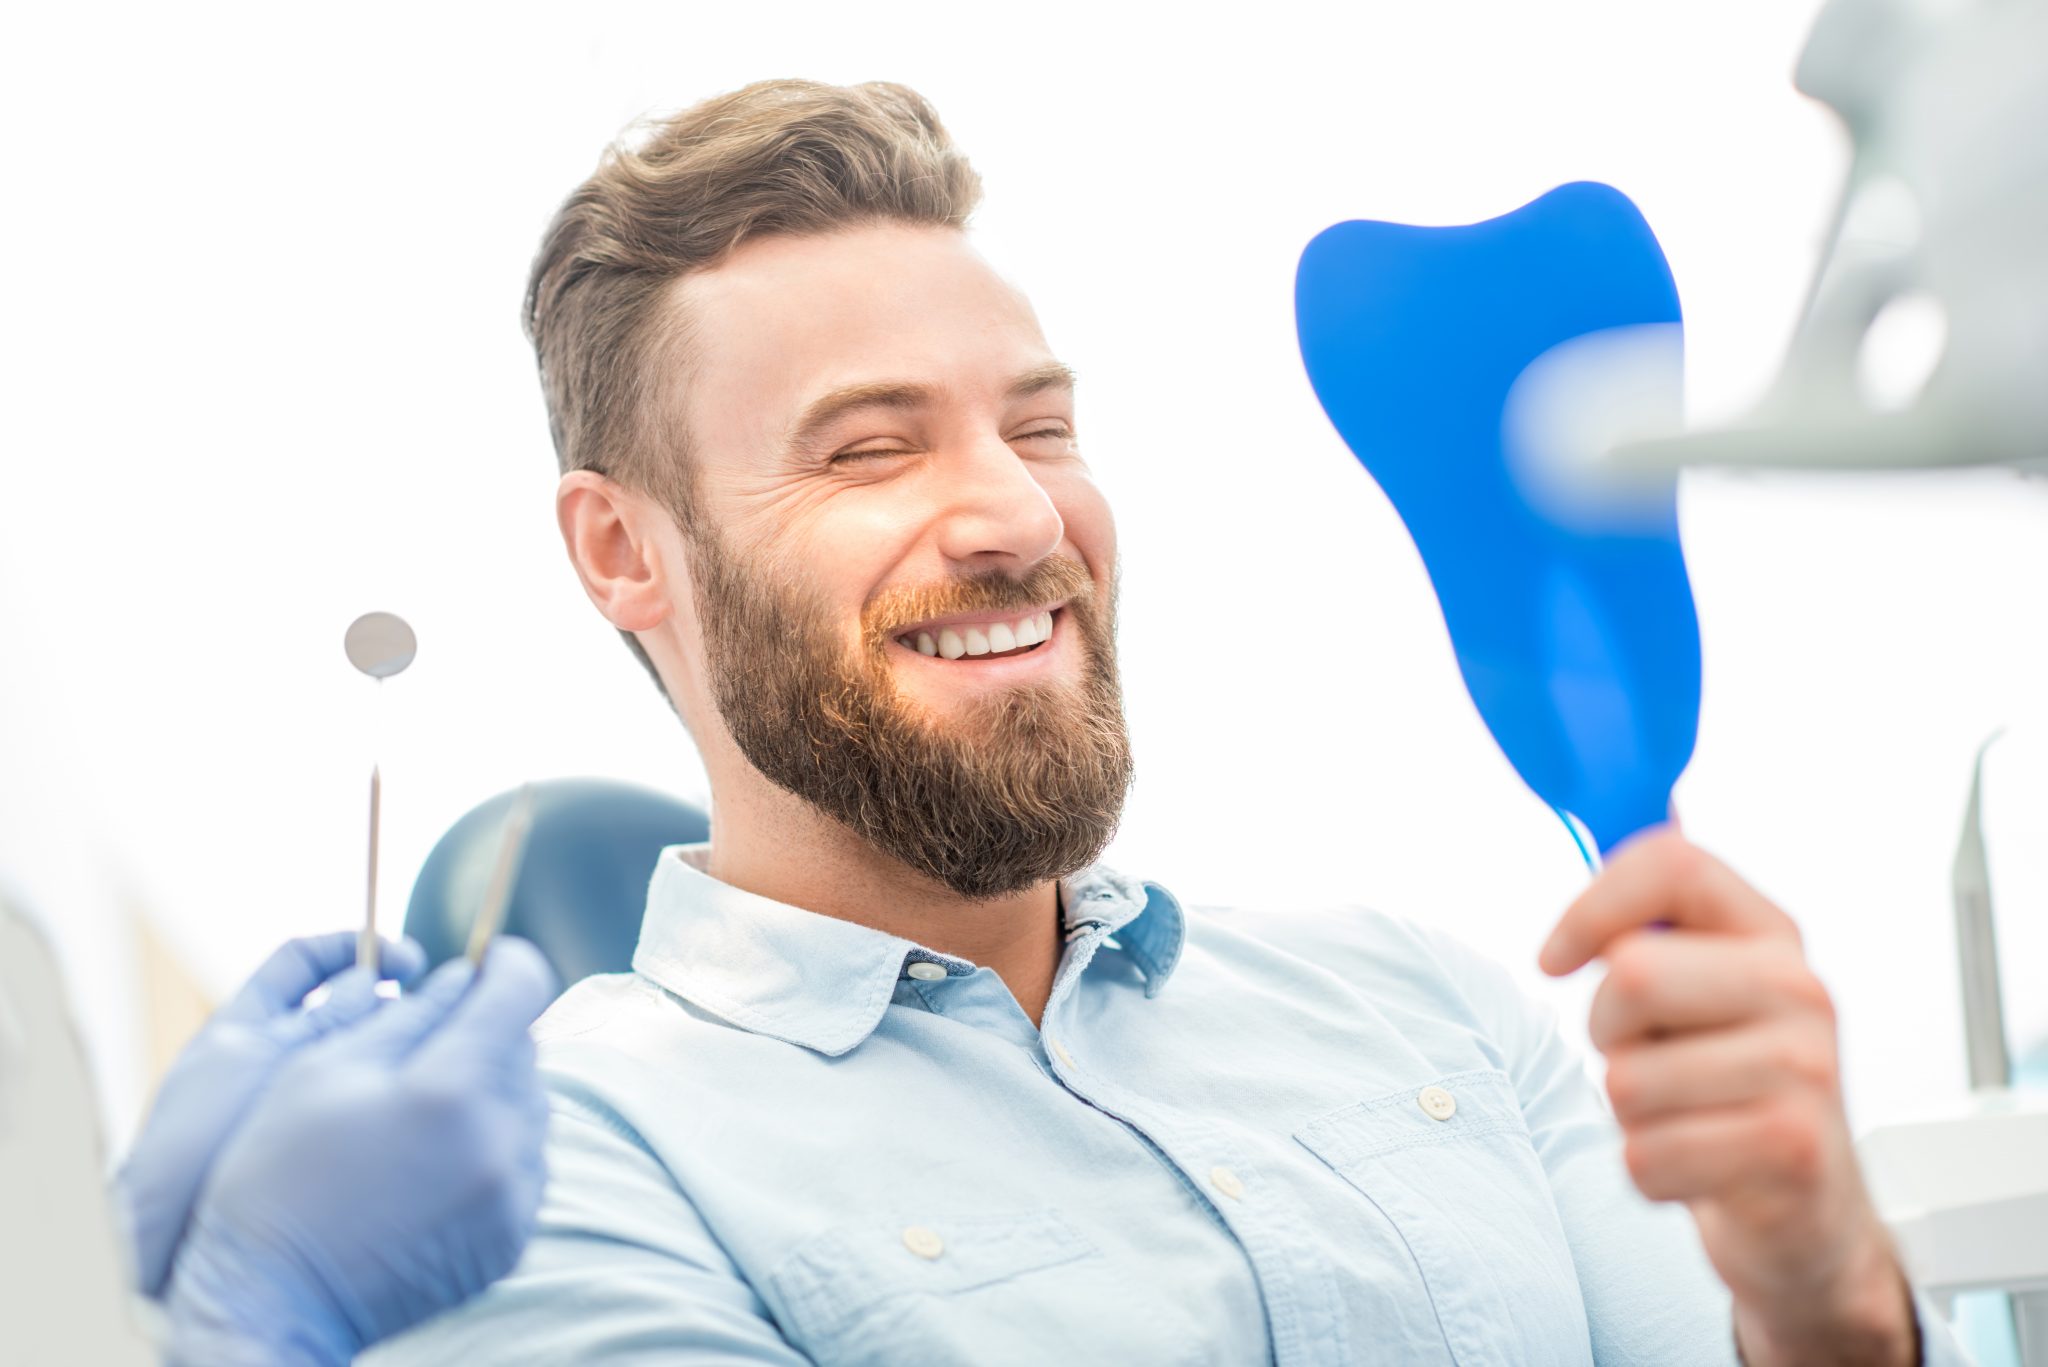 Man With Great Smile At The Dental Office